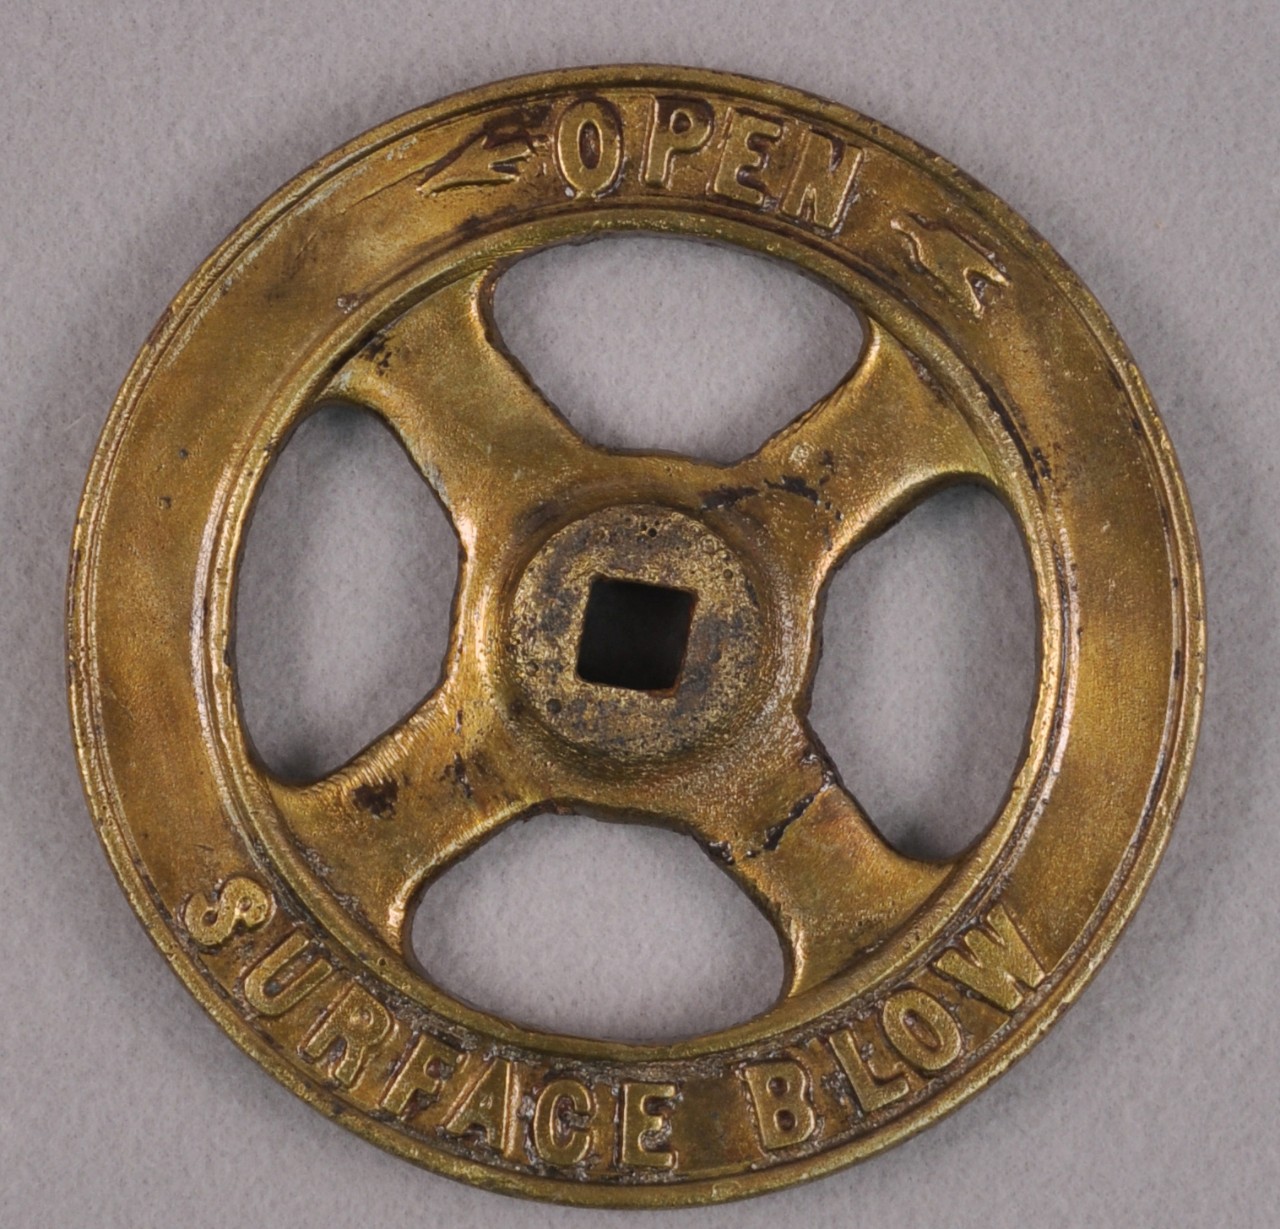 <p>A brass valve wheel with a raised circle in the middle. A square hole is cut in the middle of this circle. At the top of the valve are the words “OPEN” with an arrow point left and the words at the bottom are the words “SURFACE BELOW”.</p>